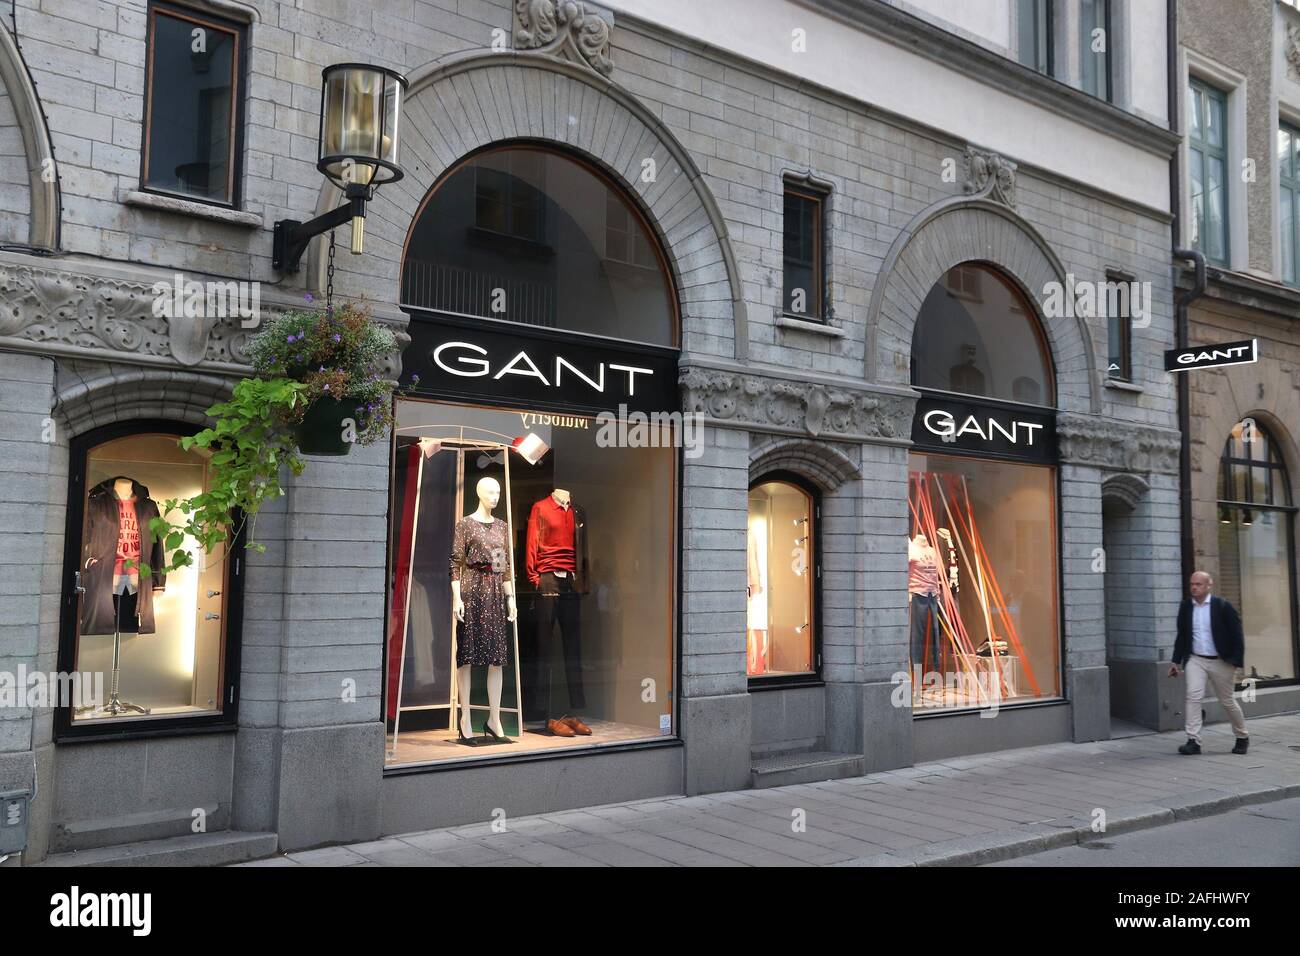 Gant Store High Resolution Stock Photography and Images - Alamy